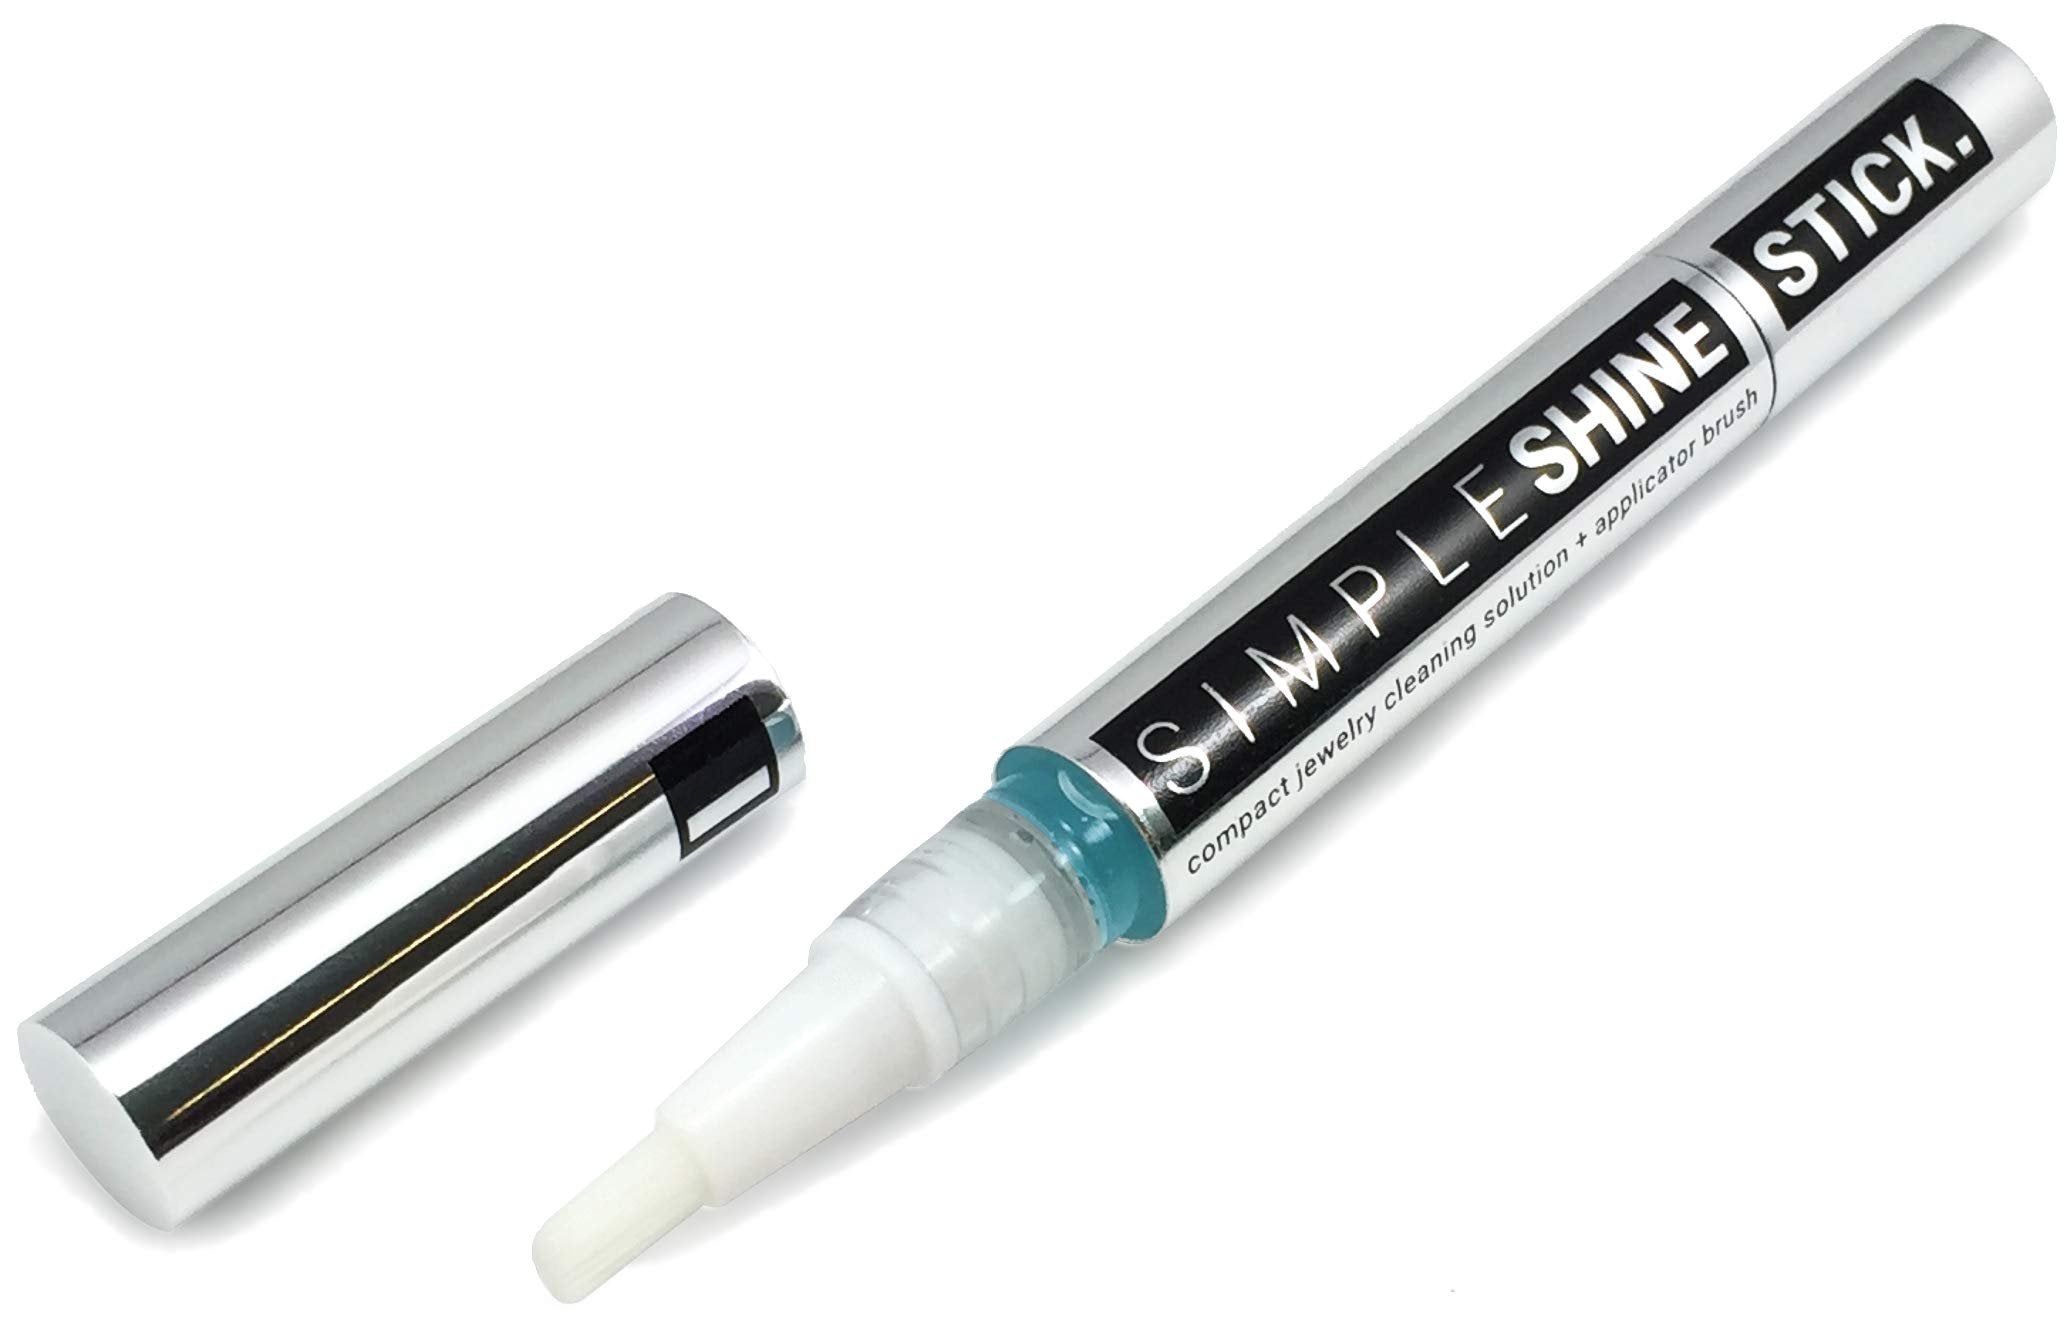 Simple Shine Jewelry Cleaner Shine Sticks - Pack of 2 | Ring & Diamond Ring Cleaner Brush for Fine and Fashion Jewelry - Make Your Diamonds Dazzle! Free Shipping & Returns